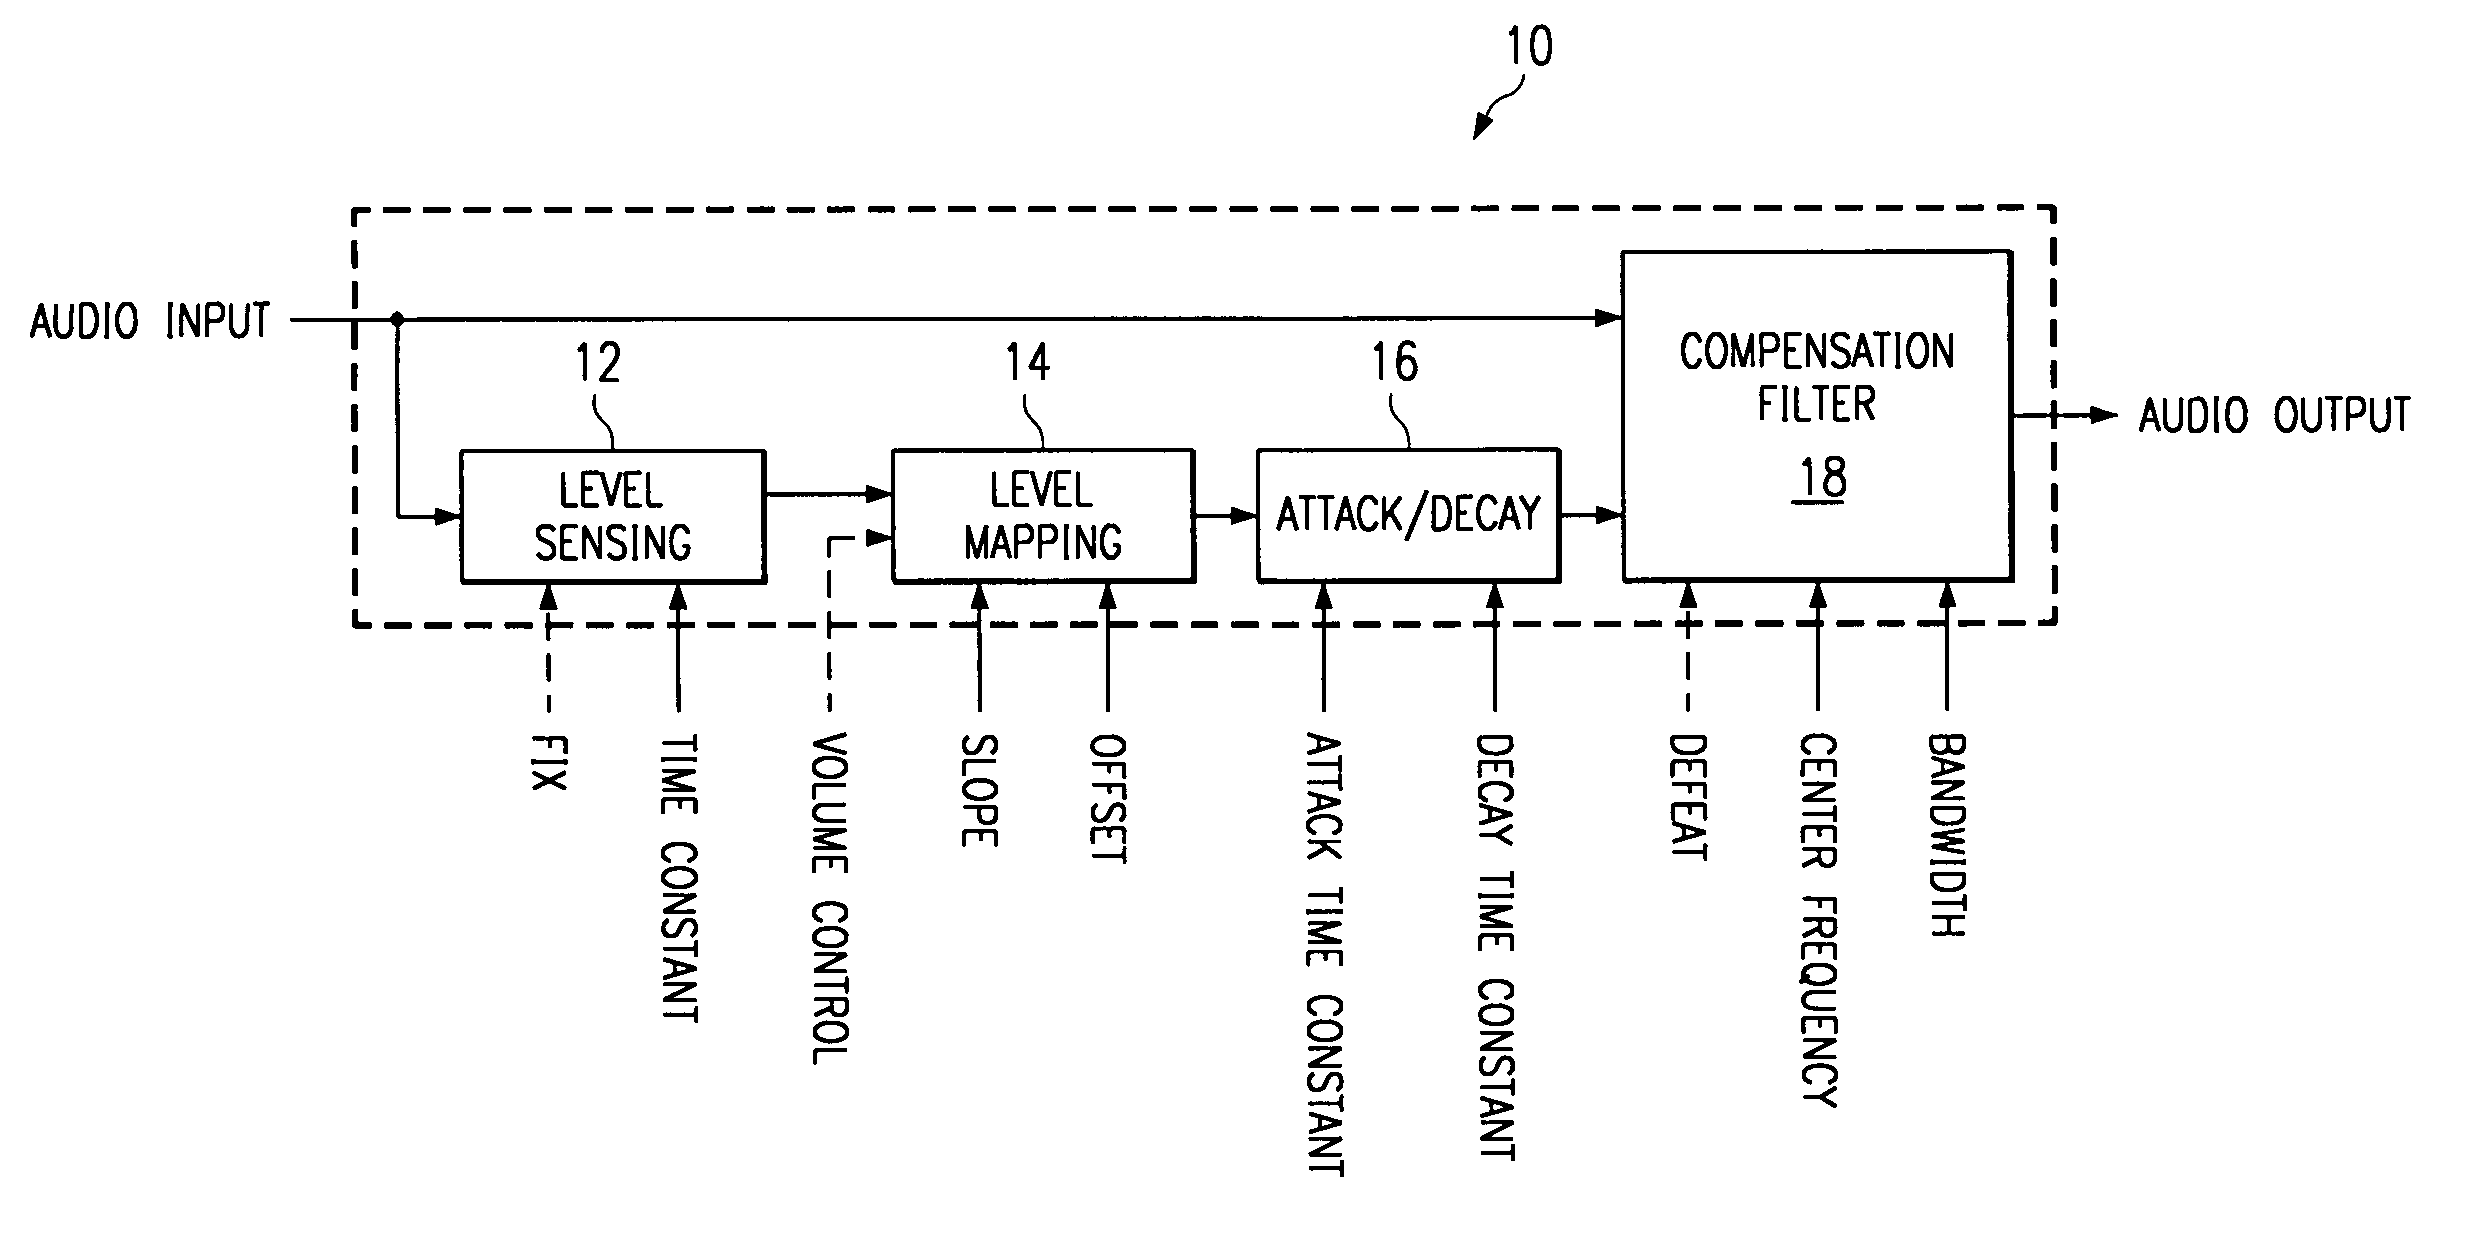 Configurable digital loudness compensation system and method